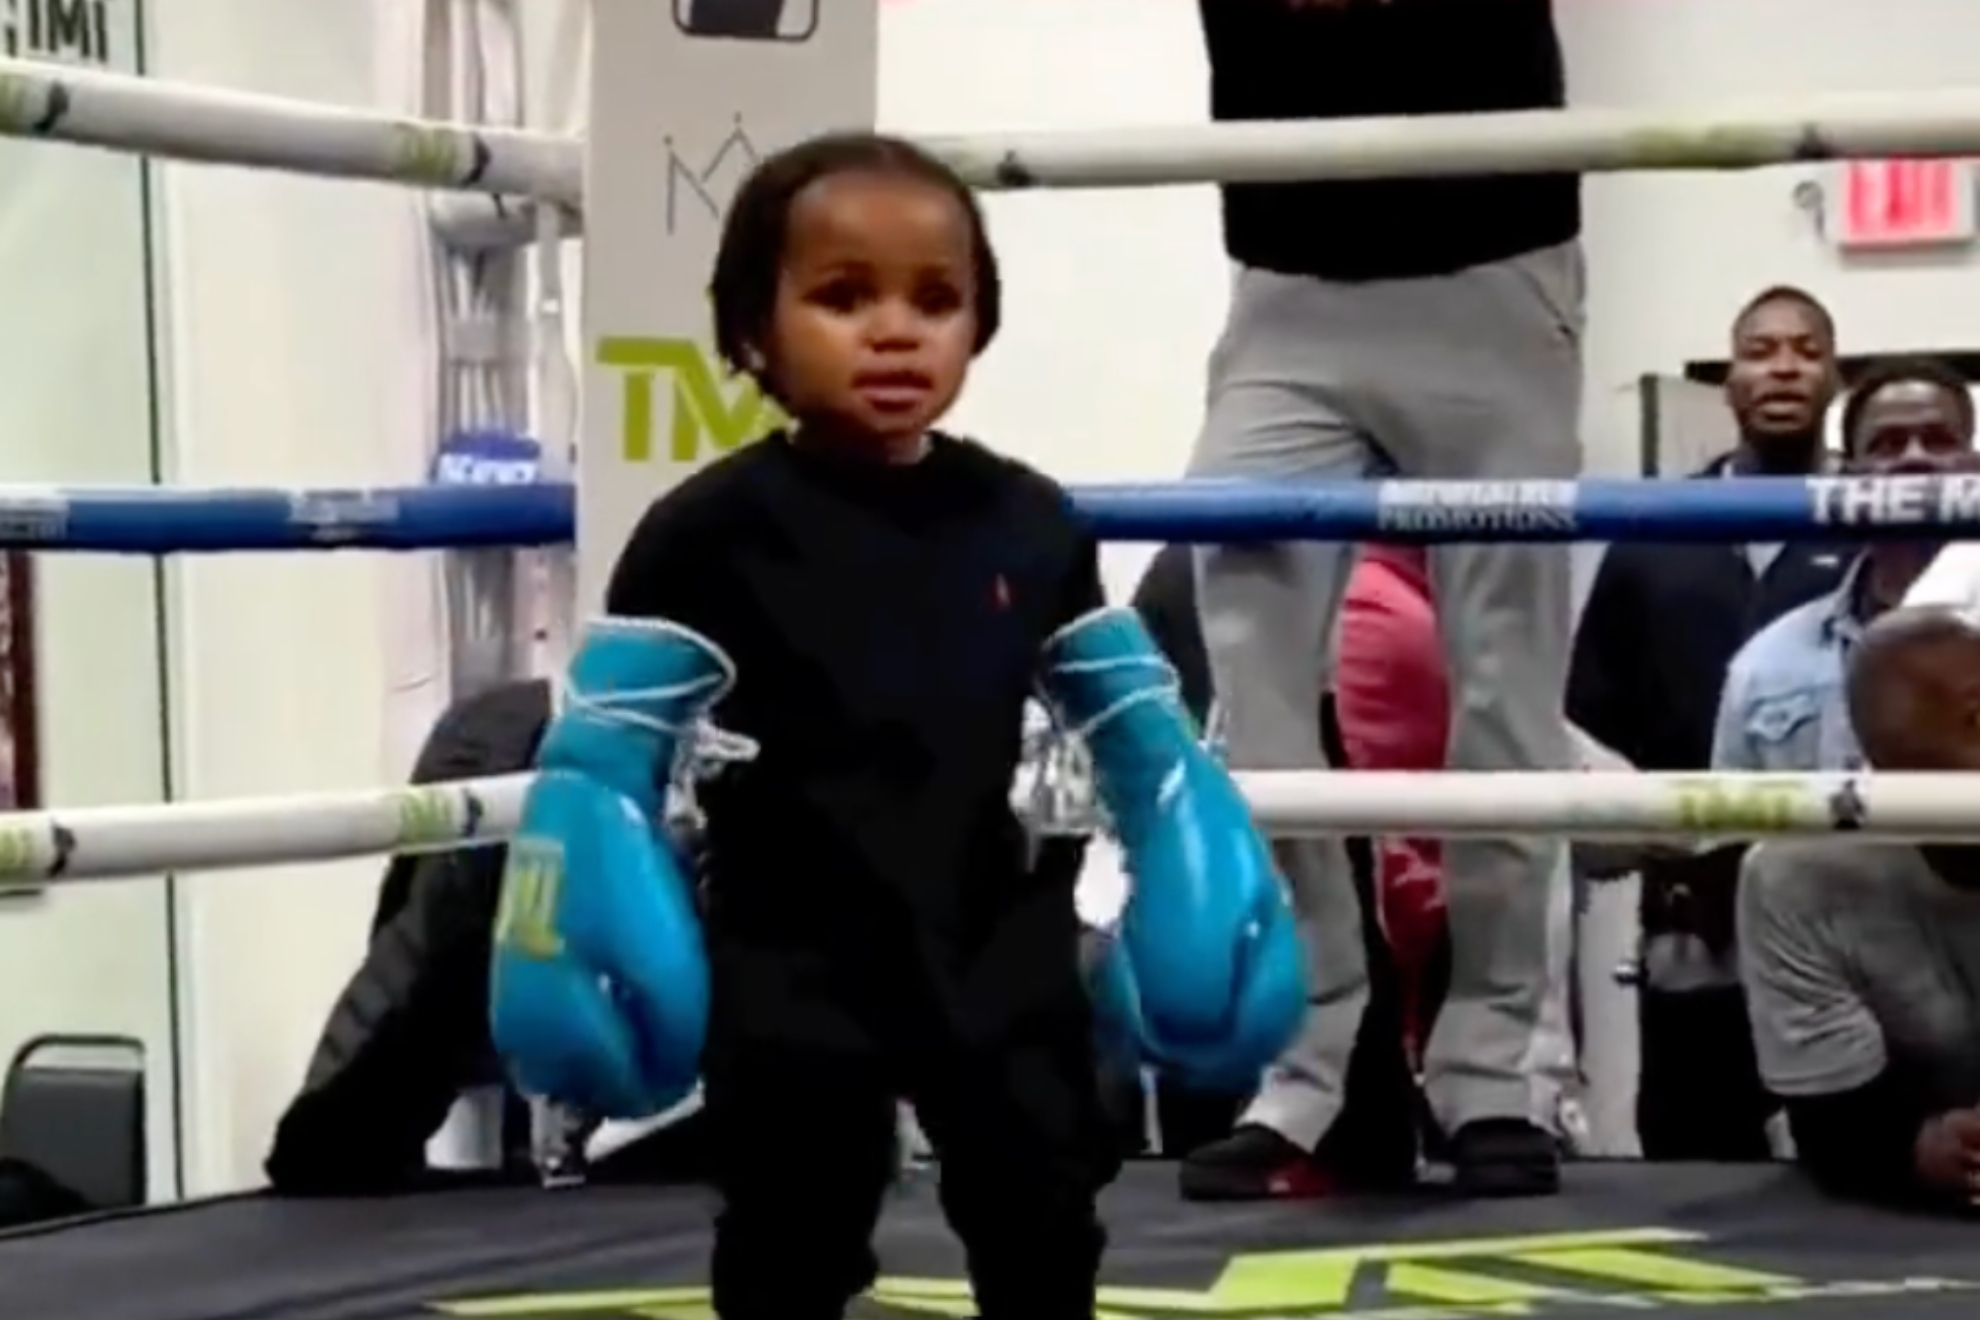 Image of Floyd Mayweather's grandson wearing boxing gloves